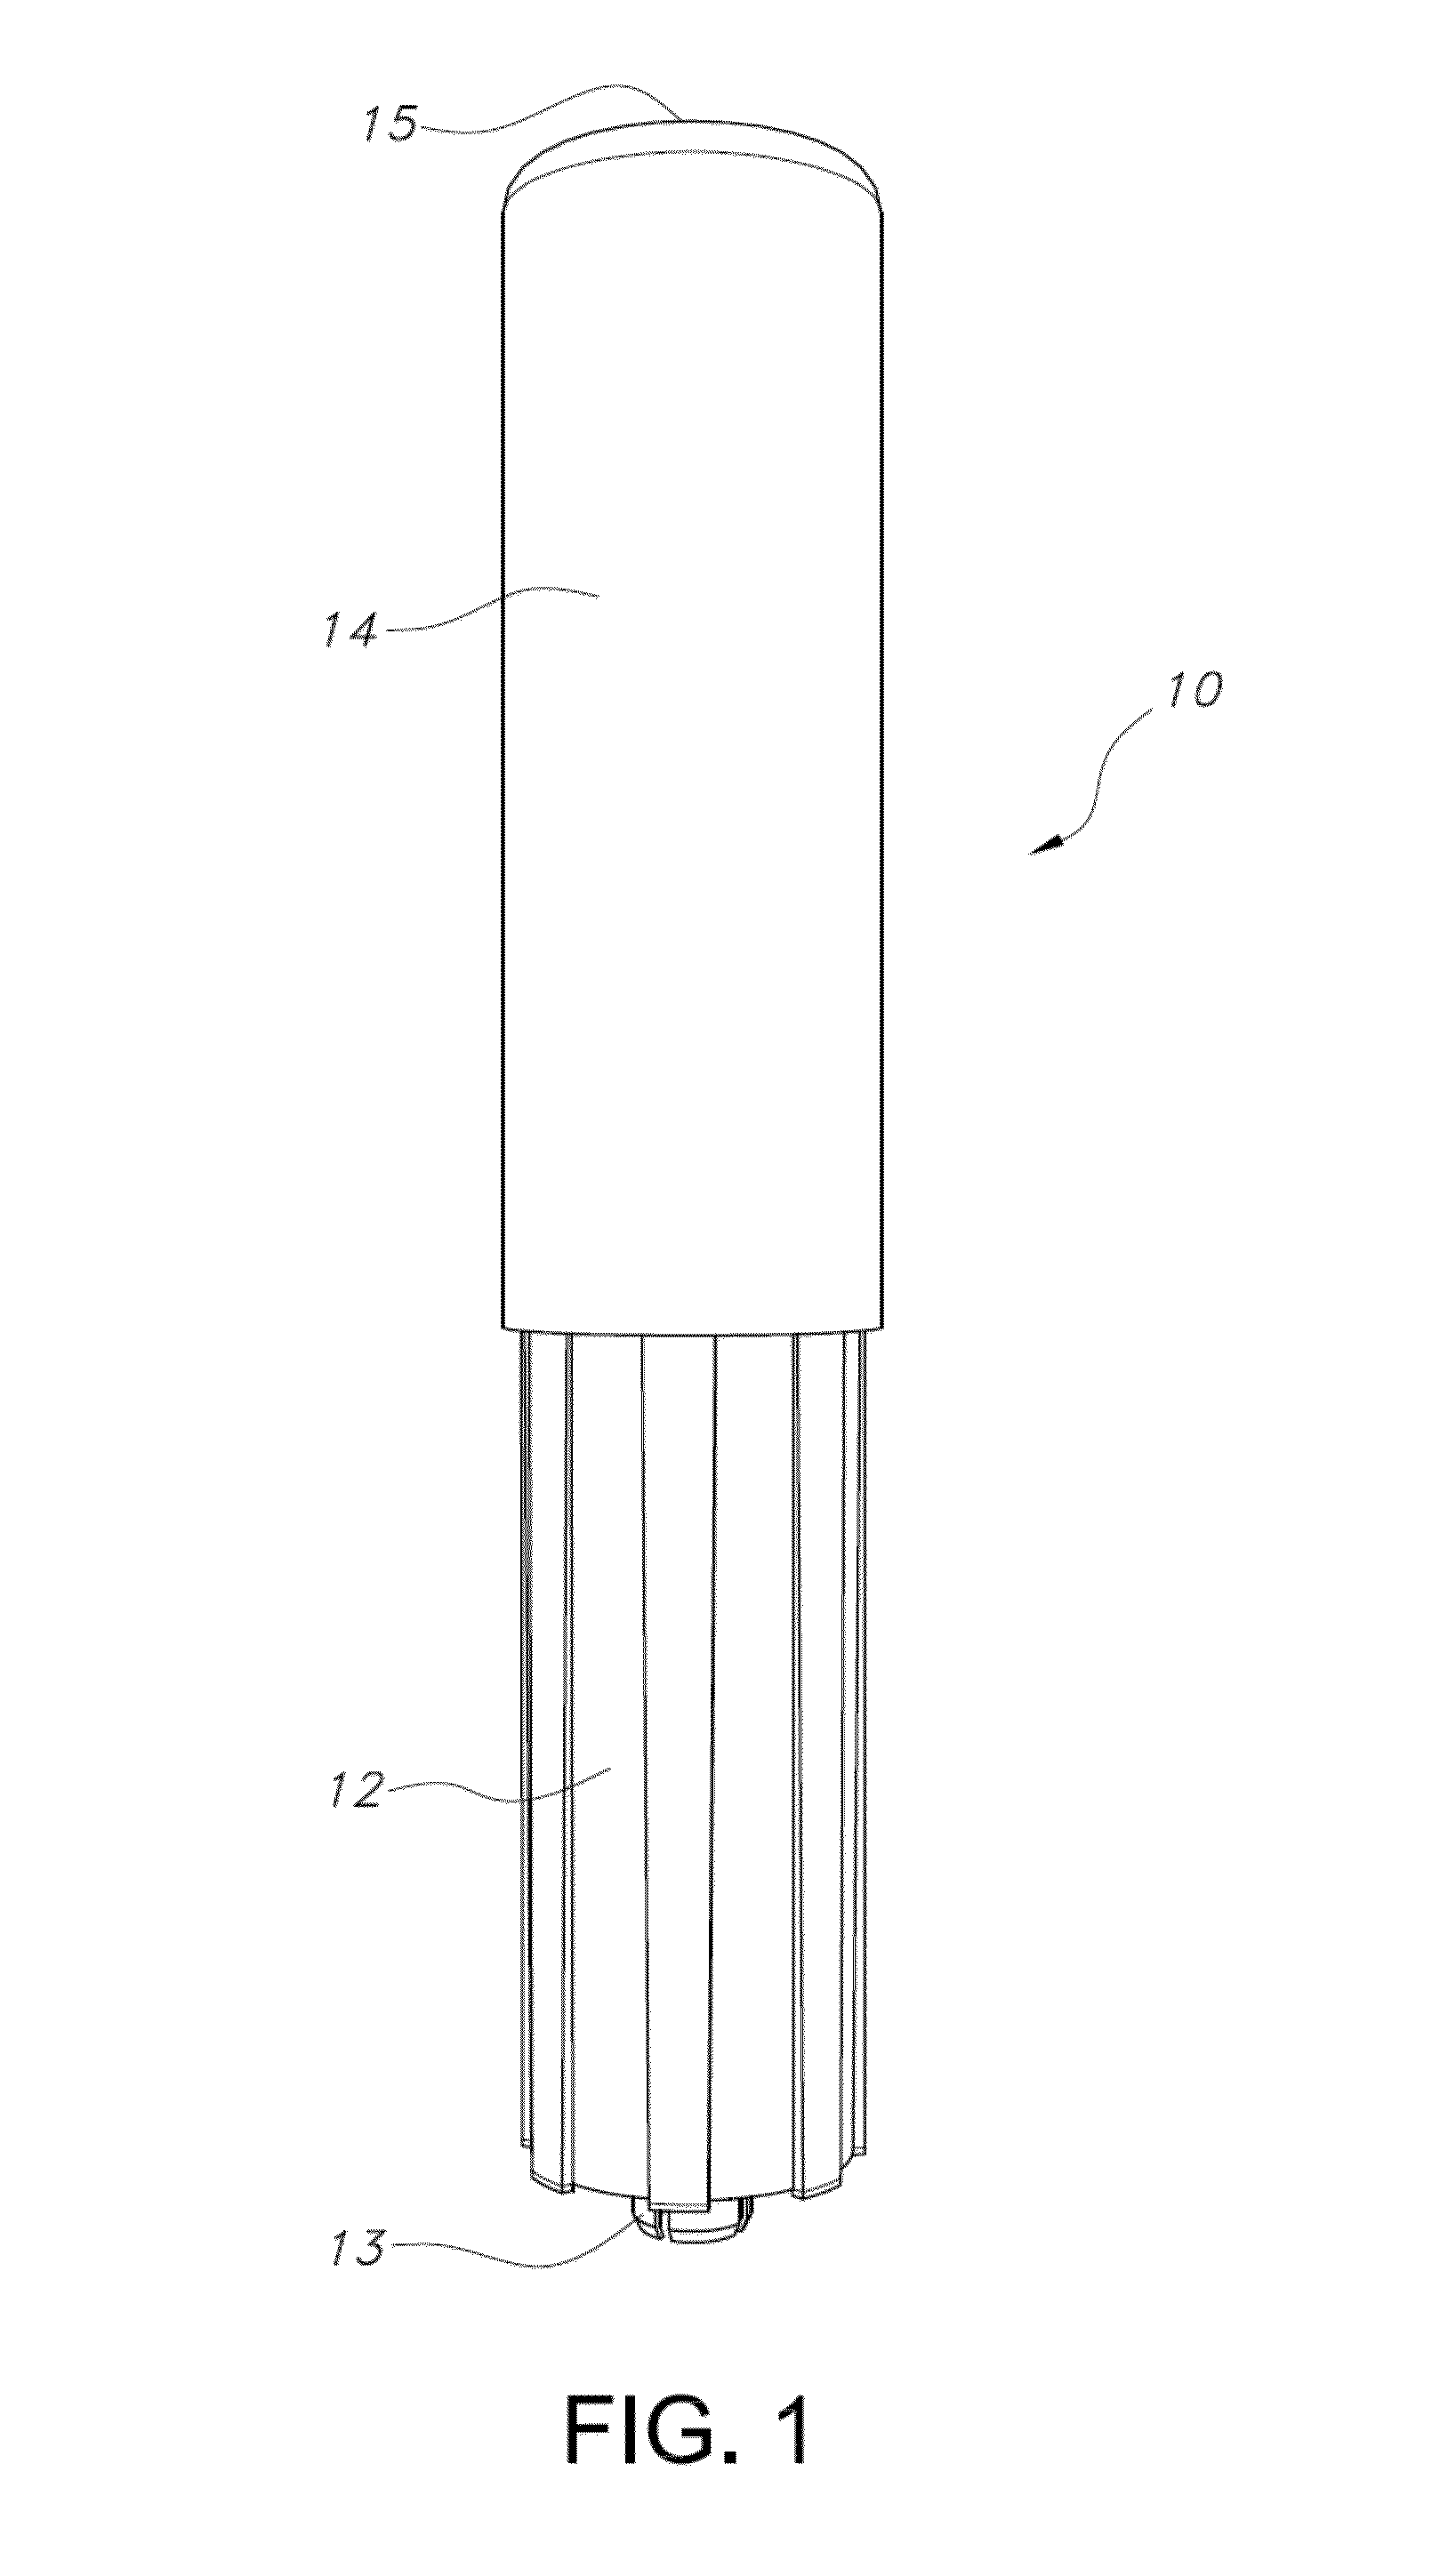 Telescoping spring assembly for mattresses and the like